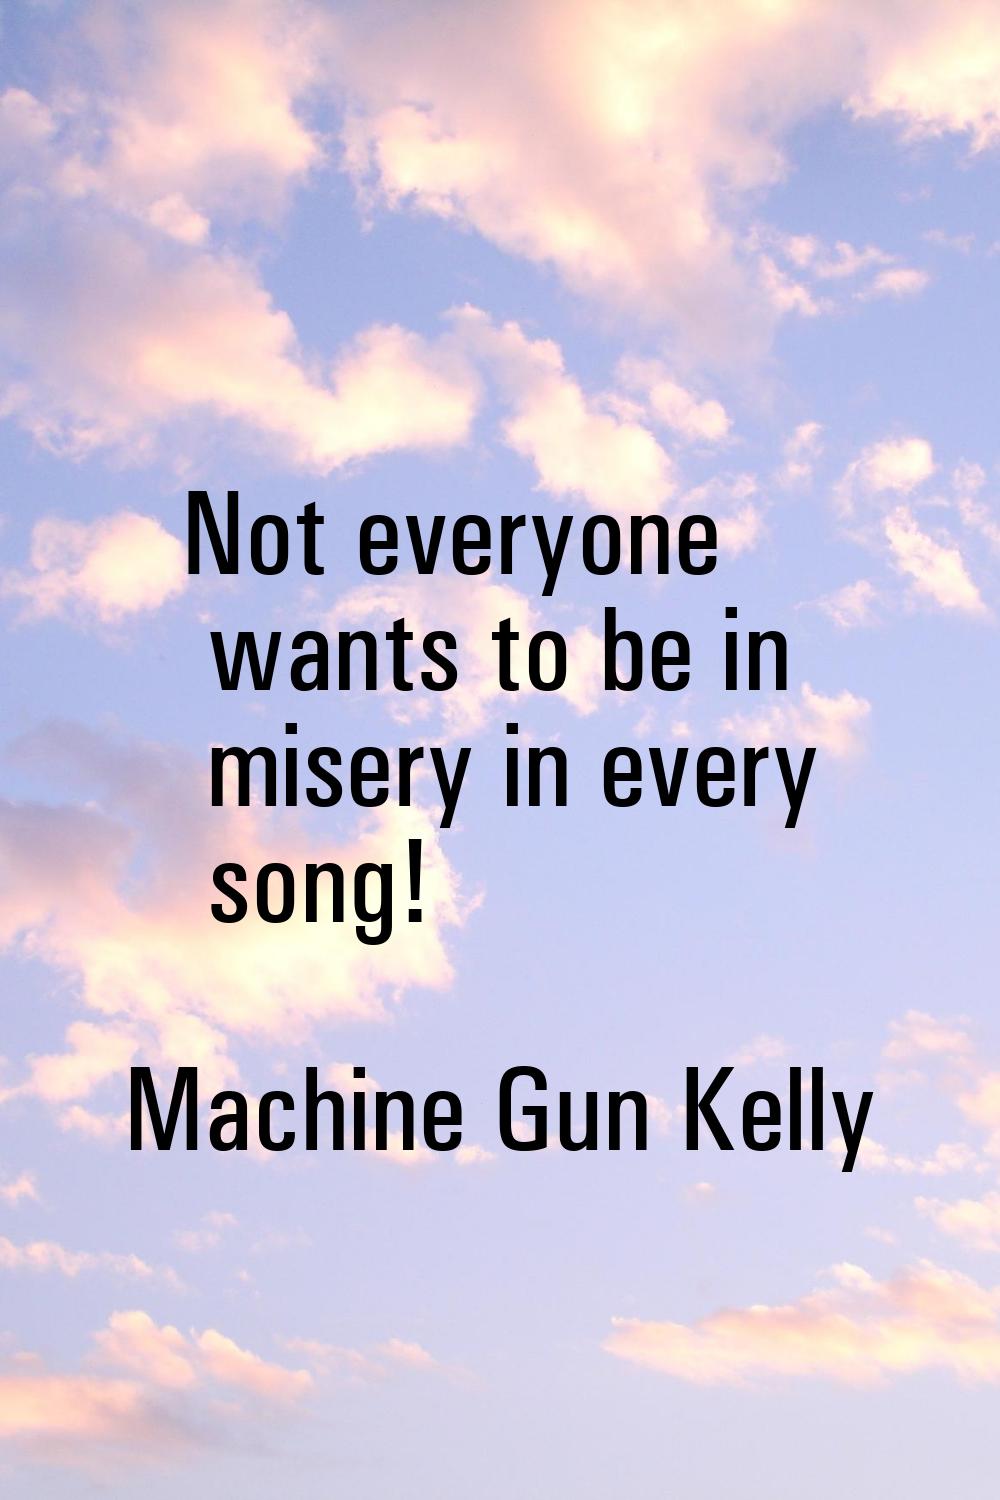 Not everyone wants to be in misery in every song!